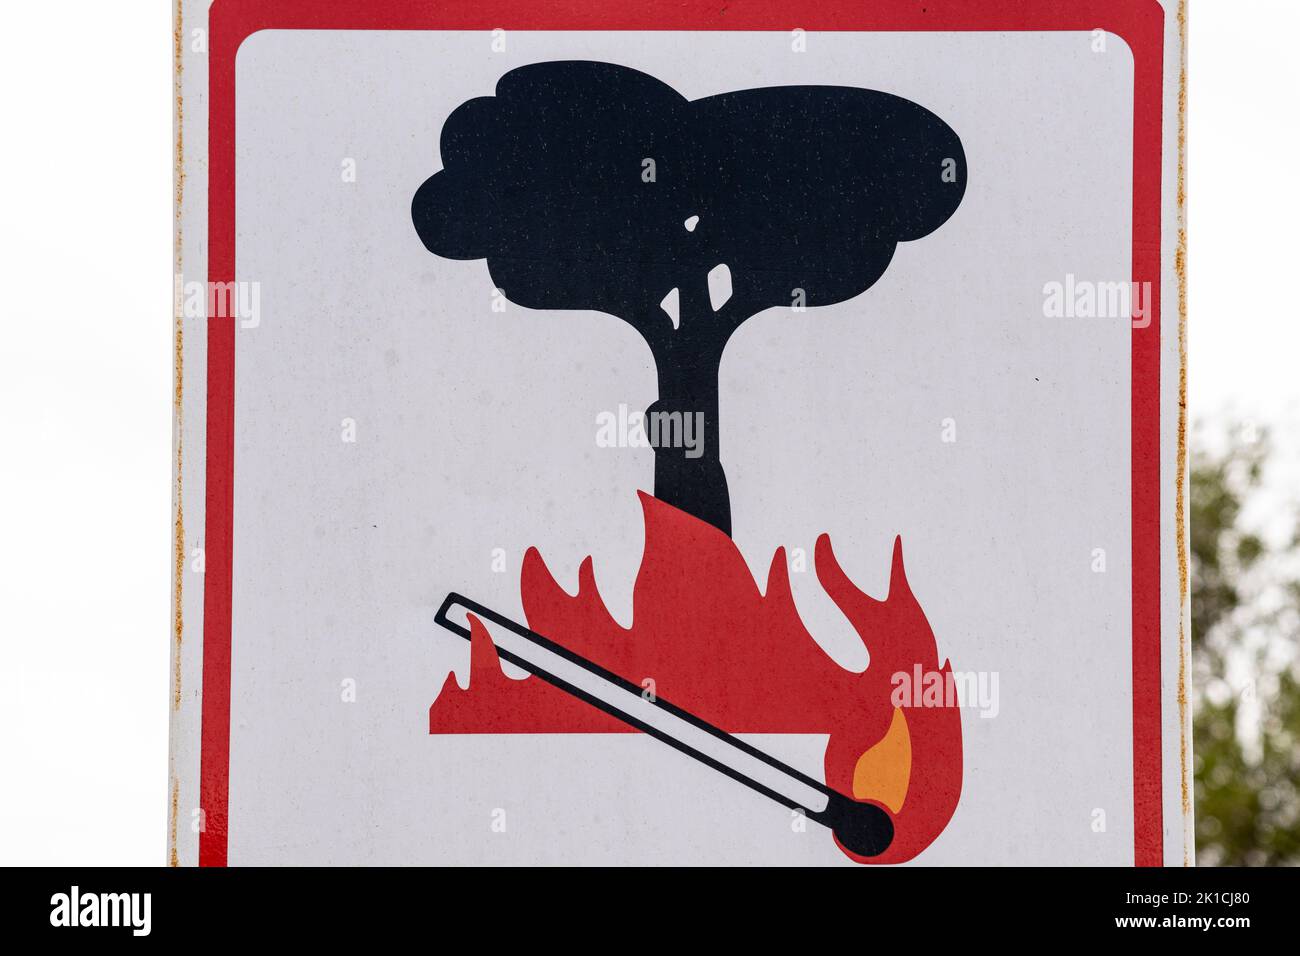 warning of maximum risk of forest fire, traffic sign, Majorca, Balearic Islands, Spain Stock Photo